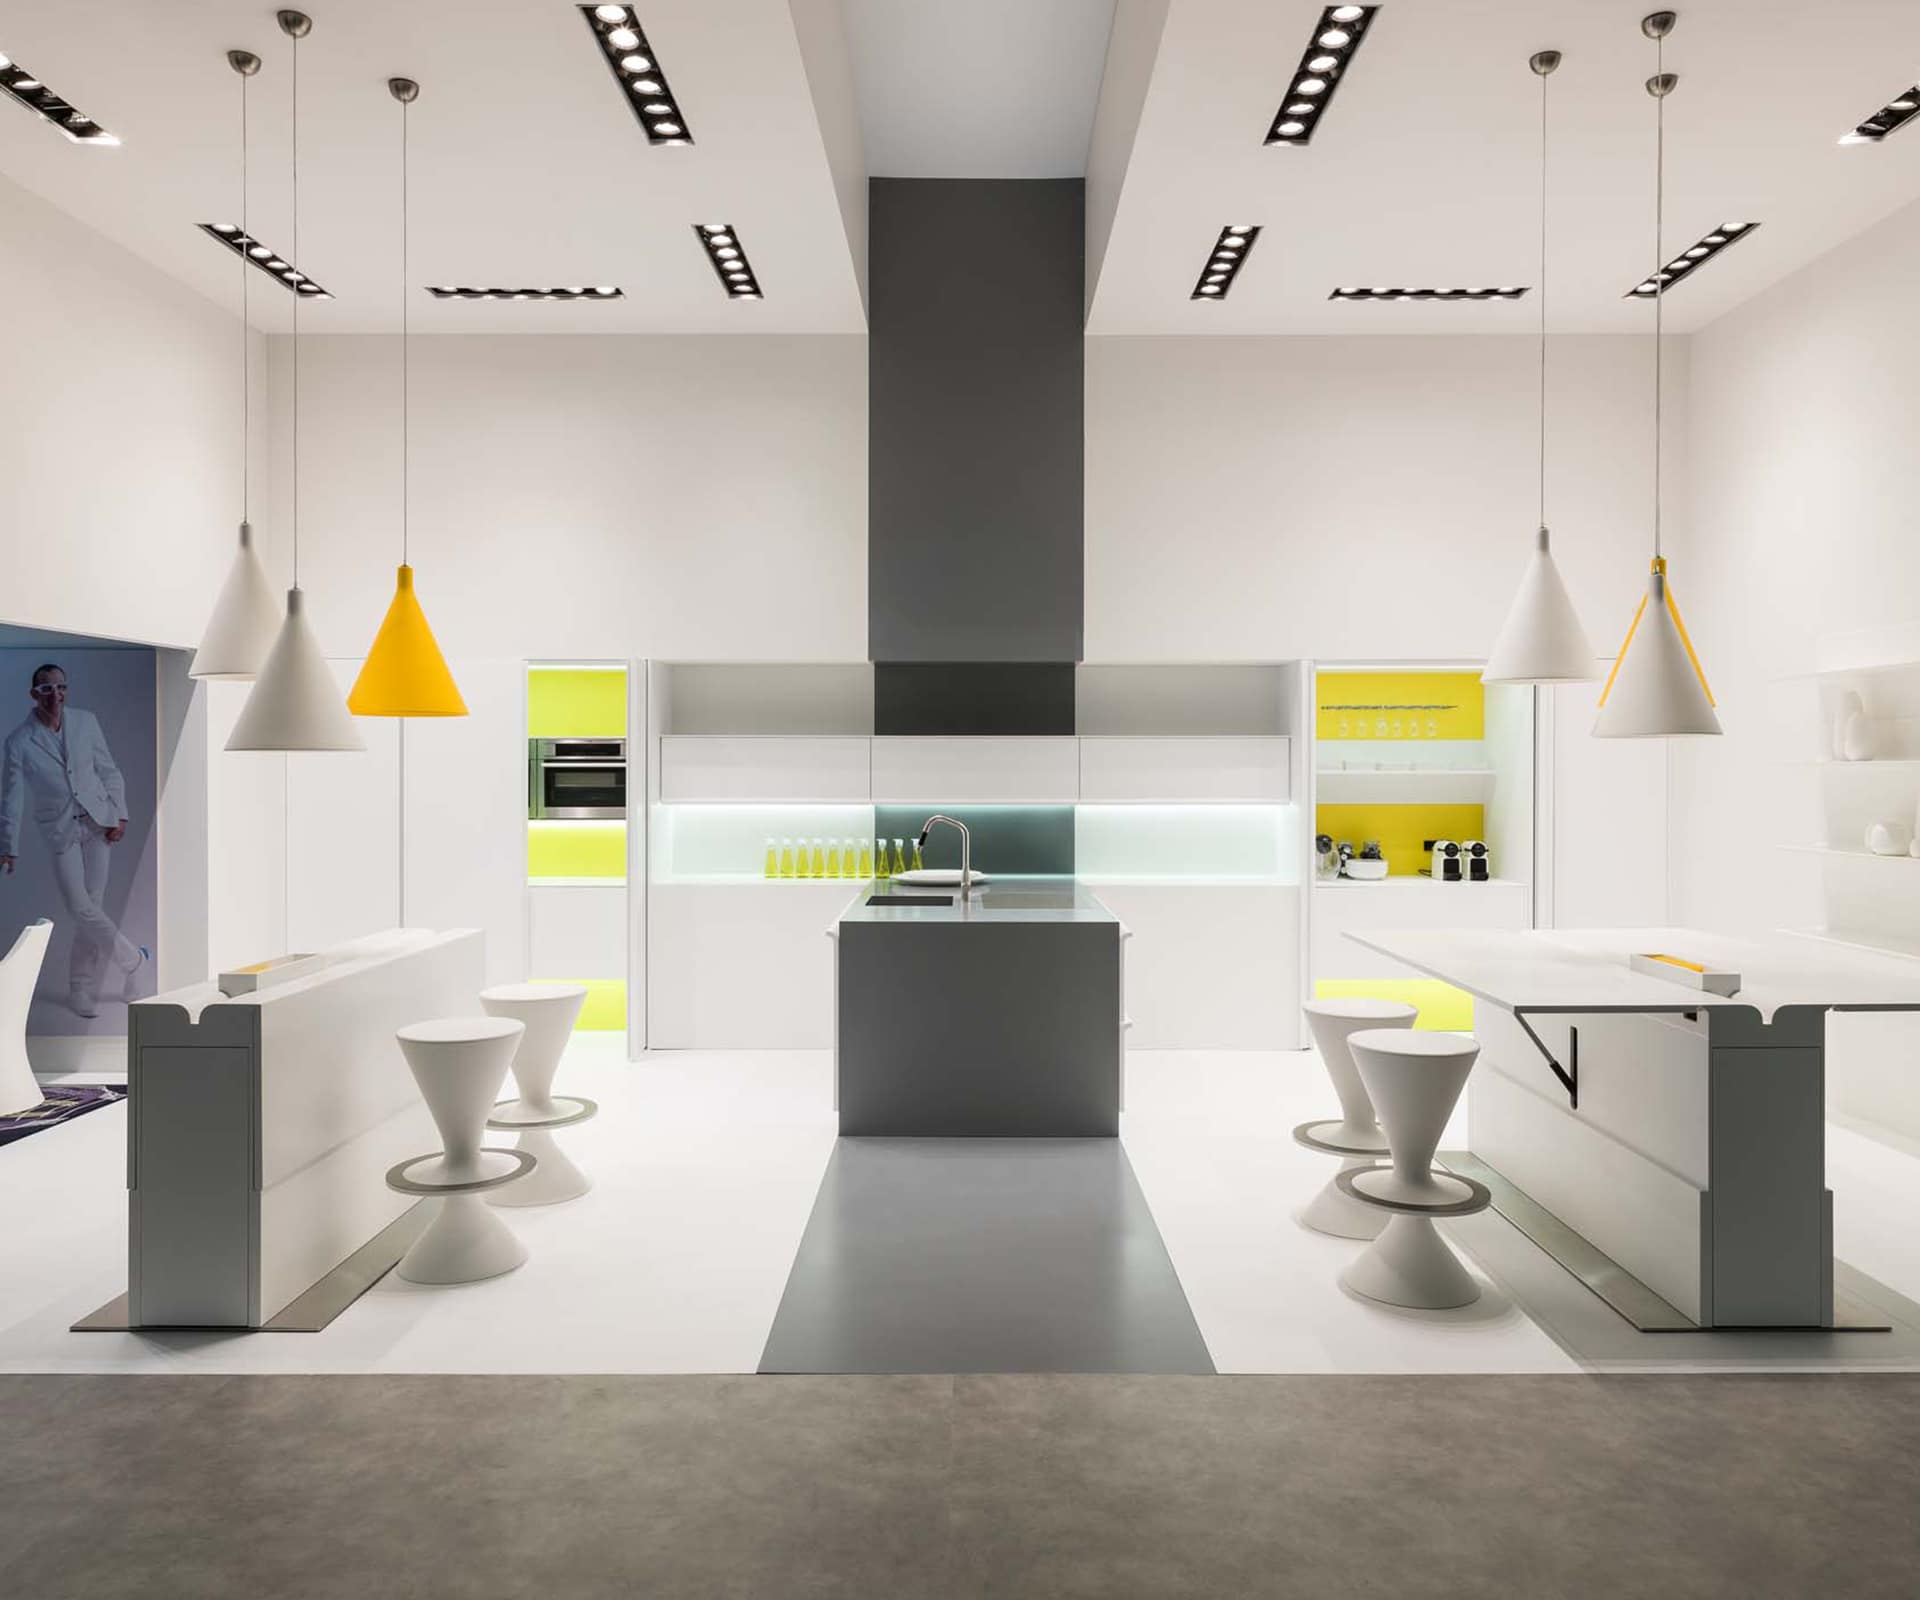 The 'Floo' kitchen by Karim Rashid for Rational in Corian Glacier White, one of the many new designs to be discussed by Nicky Duggan from Evolution of Surfaces on our Kitchen Day.